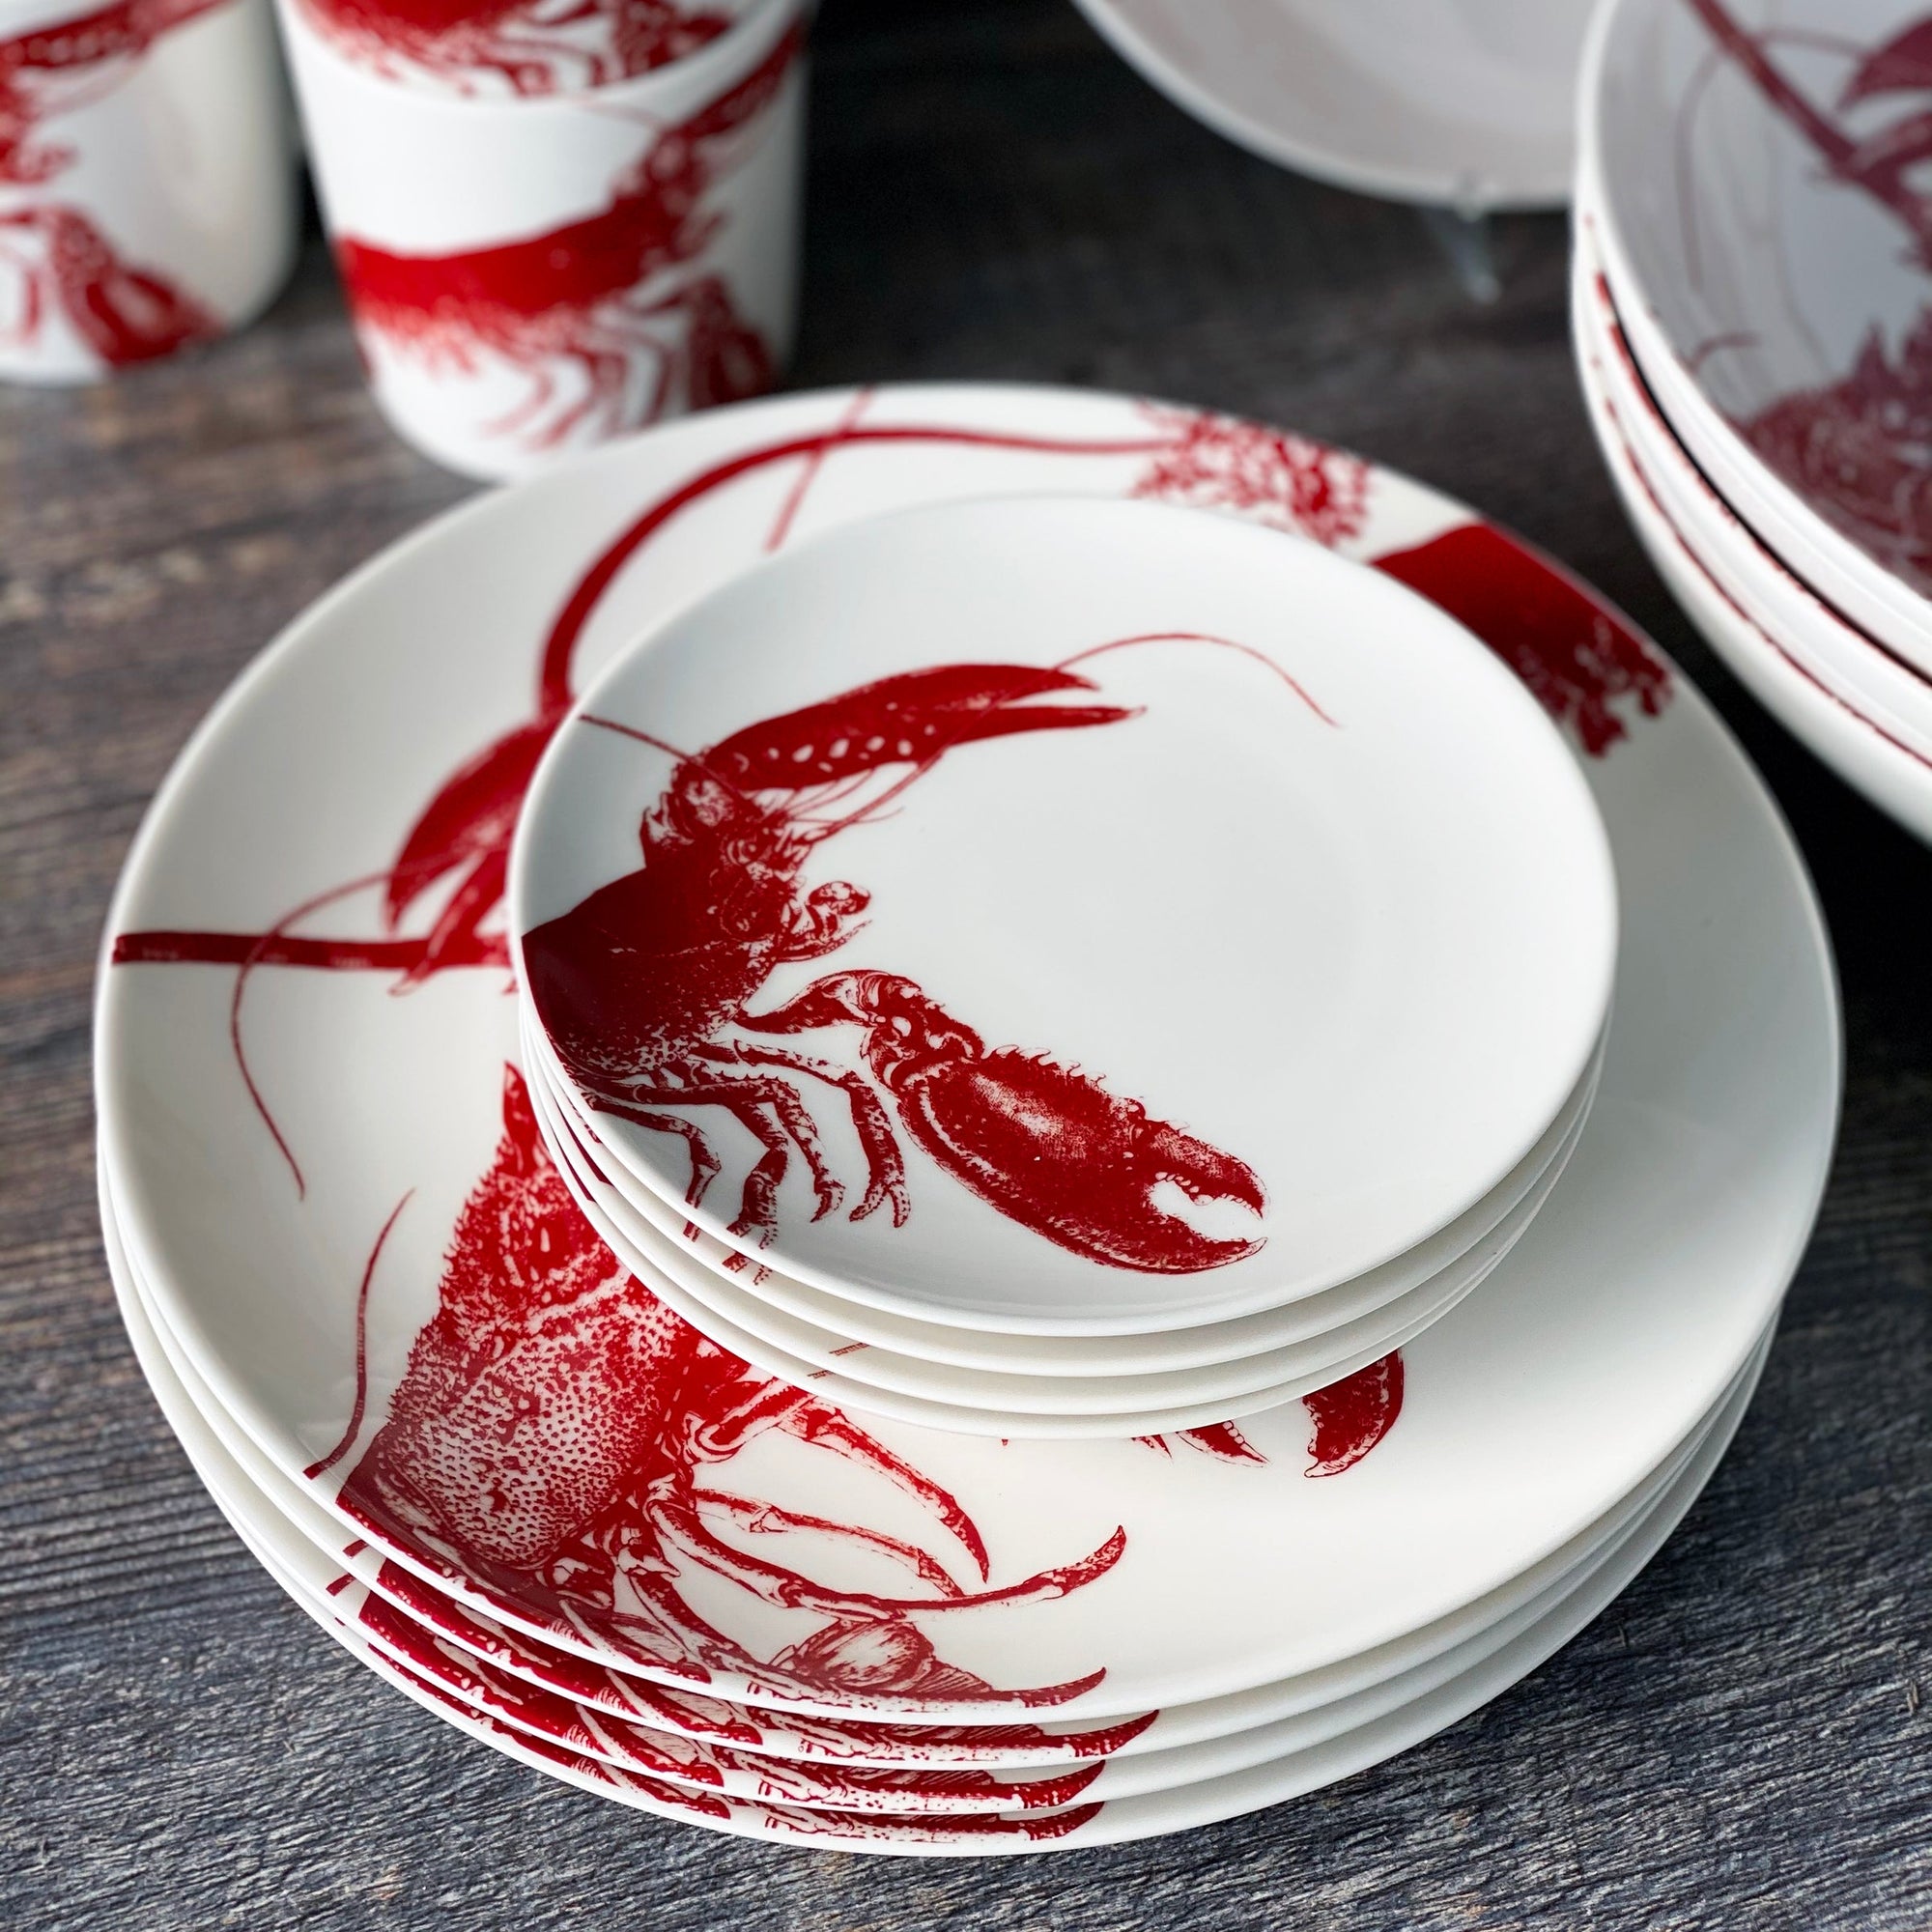 A set of Caskata Artisanal Home Complete Clambake 16 pc. Set plates with lobsters on them, perfect for a clam bake.